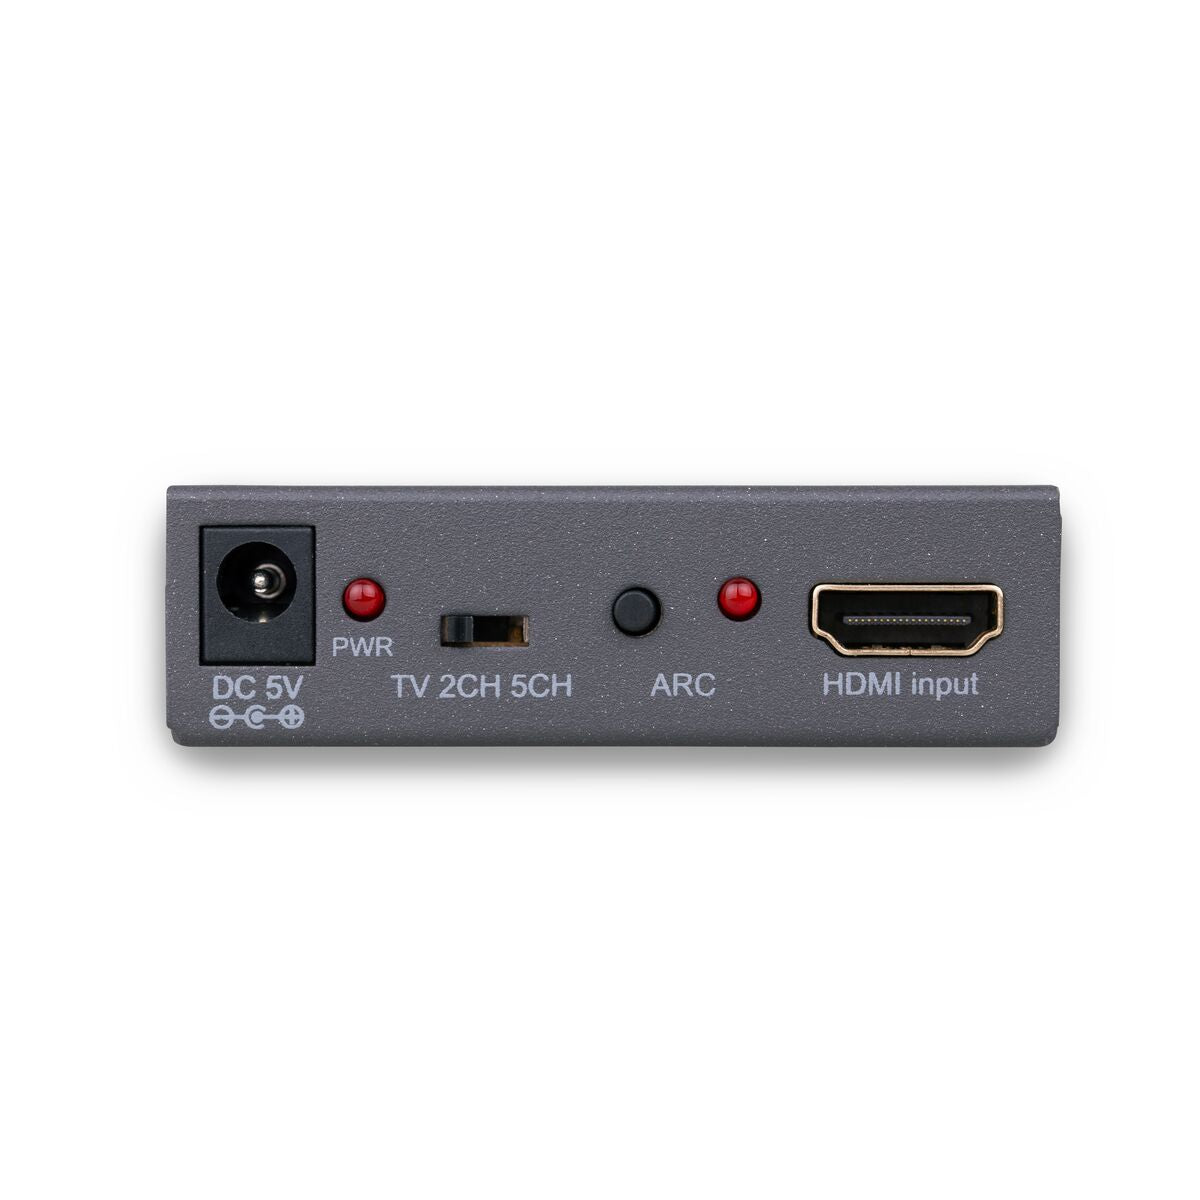 Connect AE14 - Extracteur audio HDMI 4K - 4K30 - ARC - 10.2 Gbps